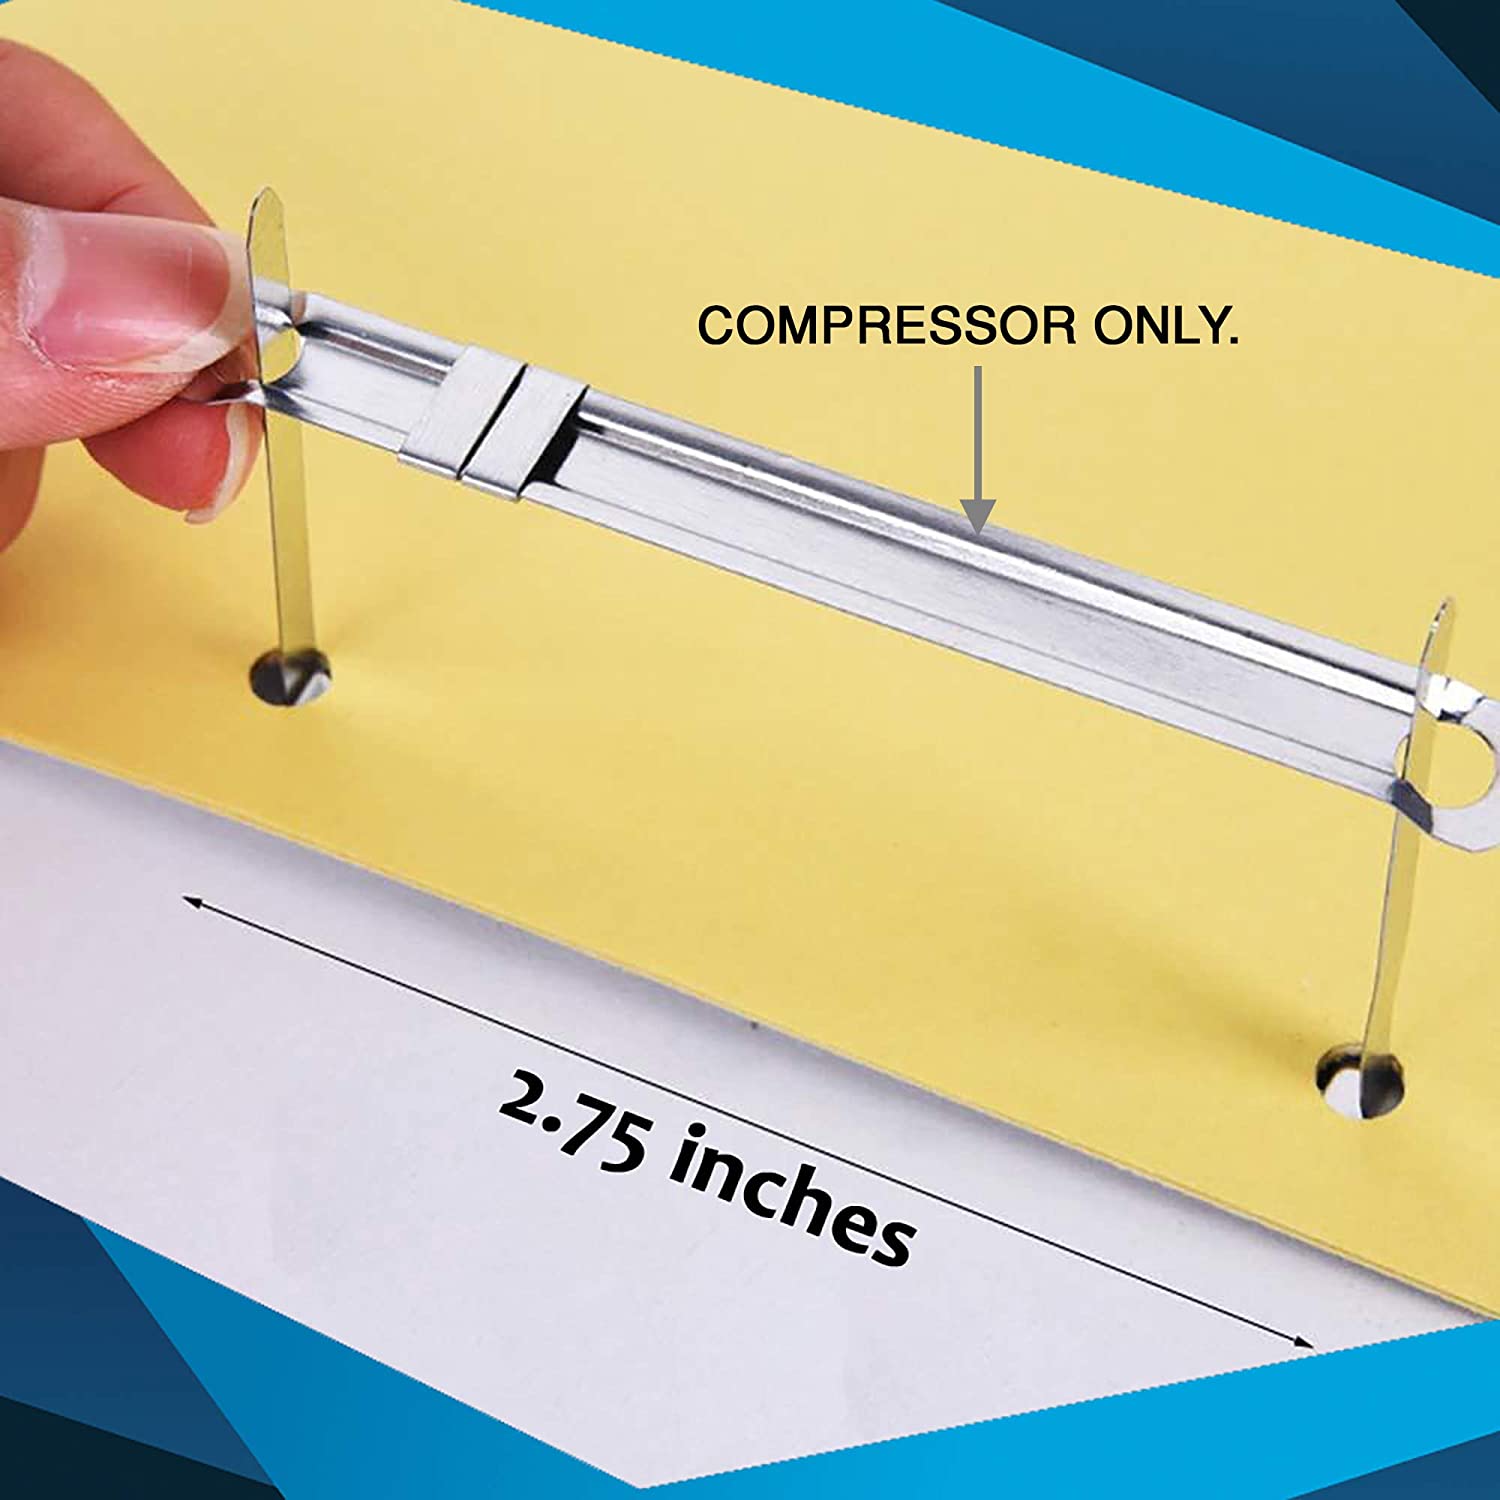 Prong Paper Fastener Compressors for Standard 2-Hole Punch, Works with 1 Inch - 3.5 Inch Capacity Box of 500 (Compressors Only)